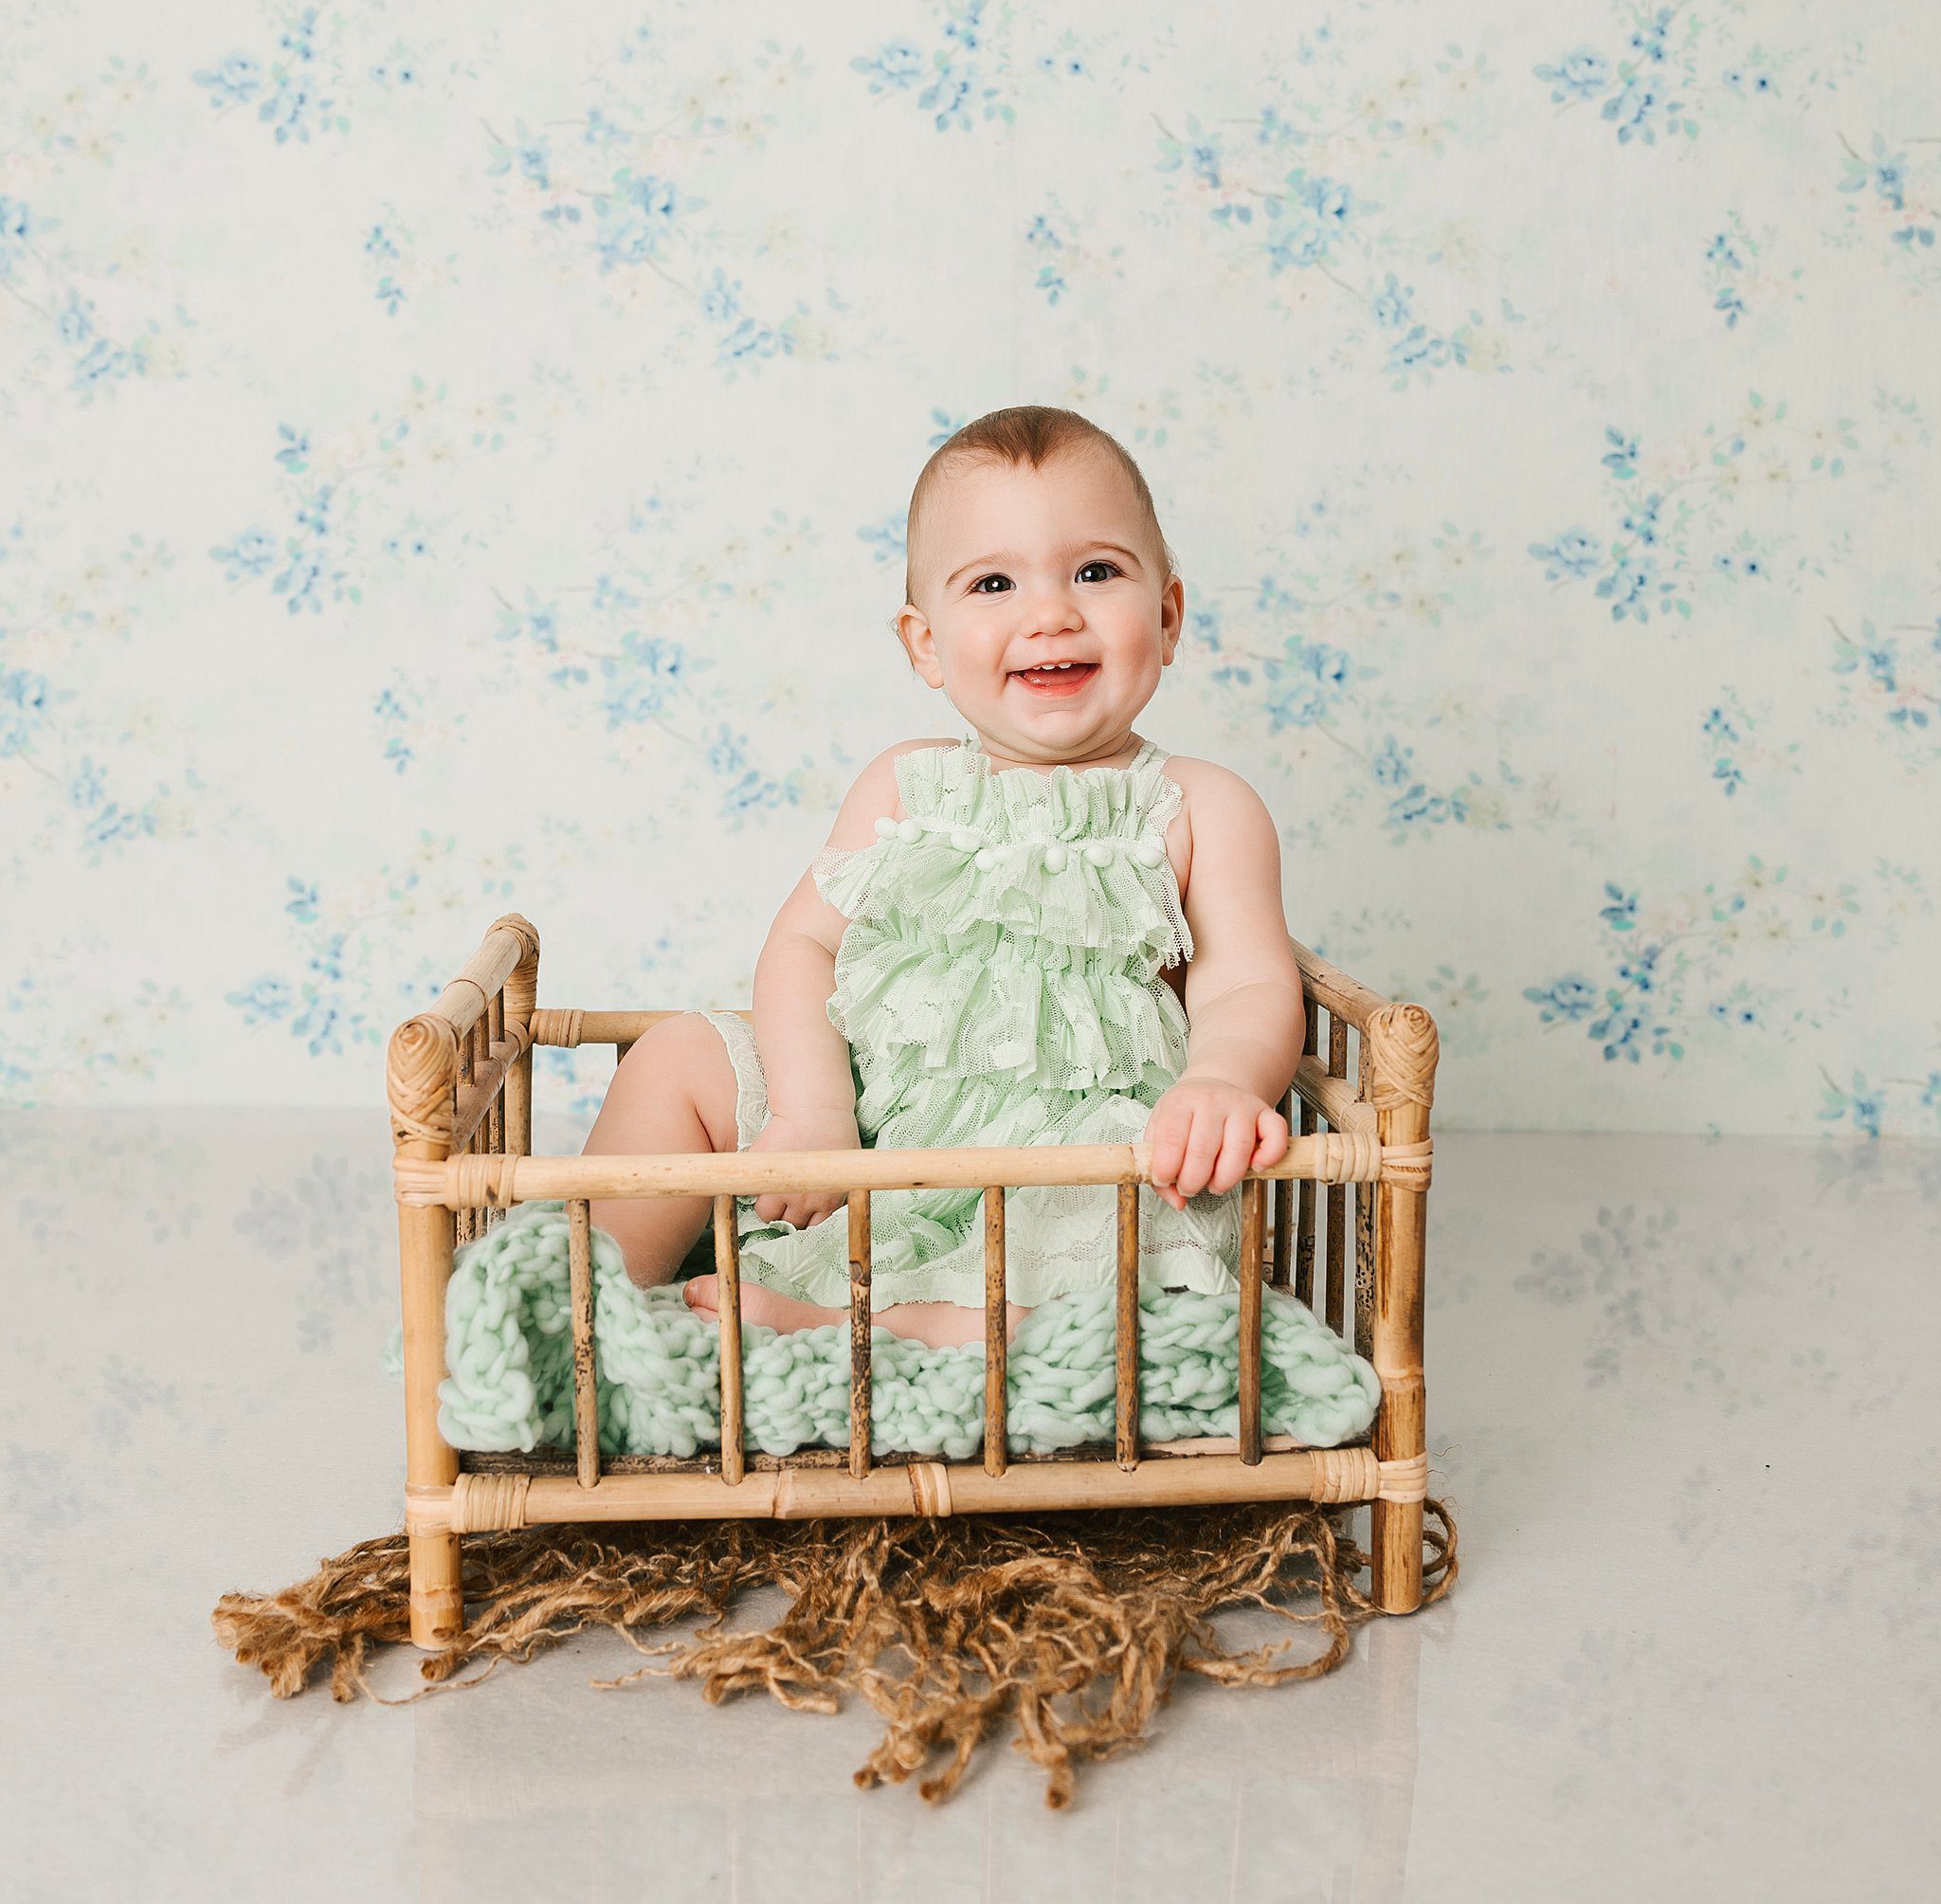 A happy toddler girl in a green dress sits in a wicker bed in a studio before visiting preschools erie pa